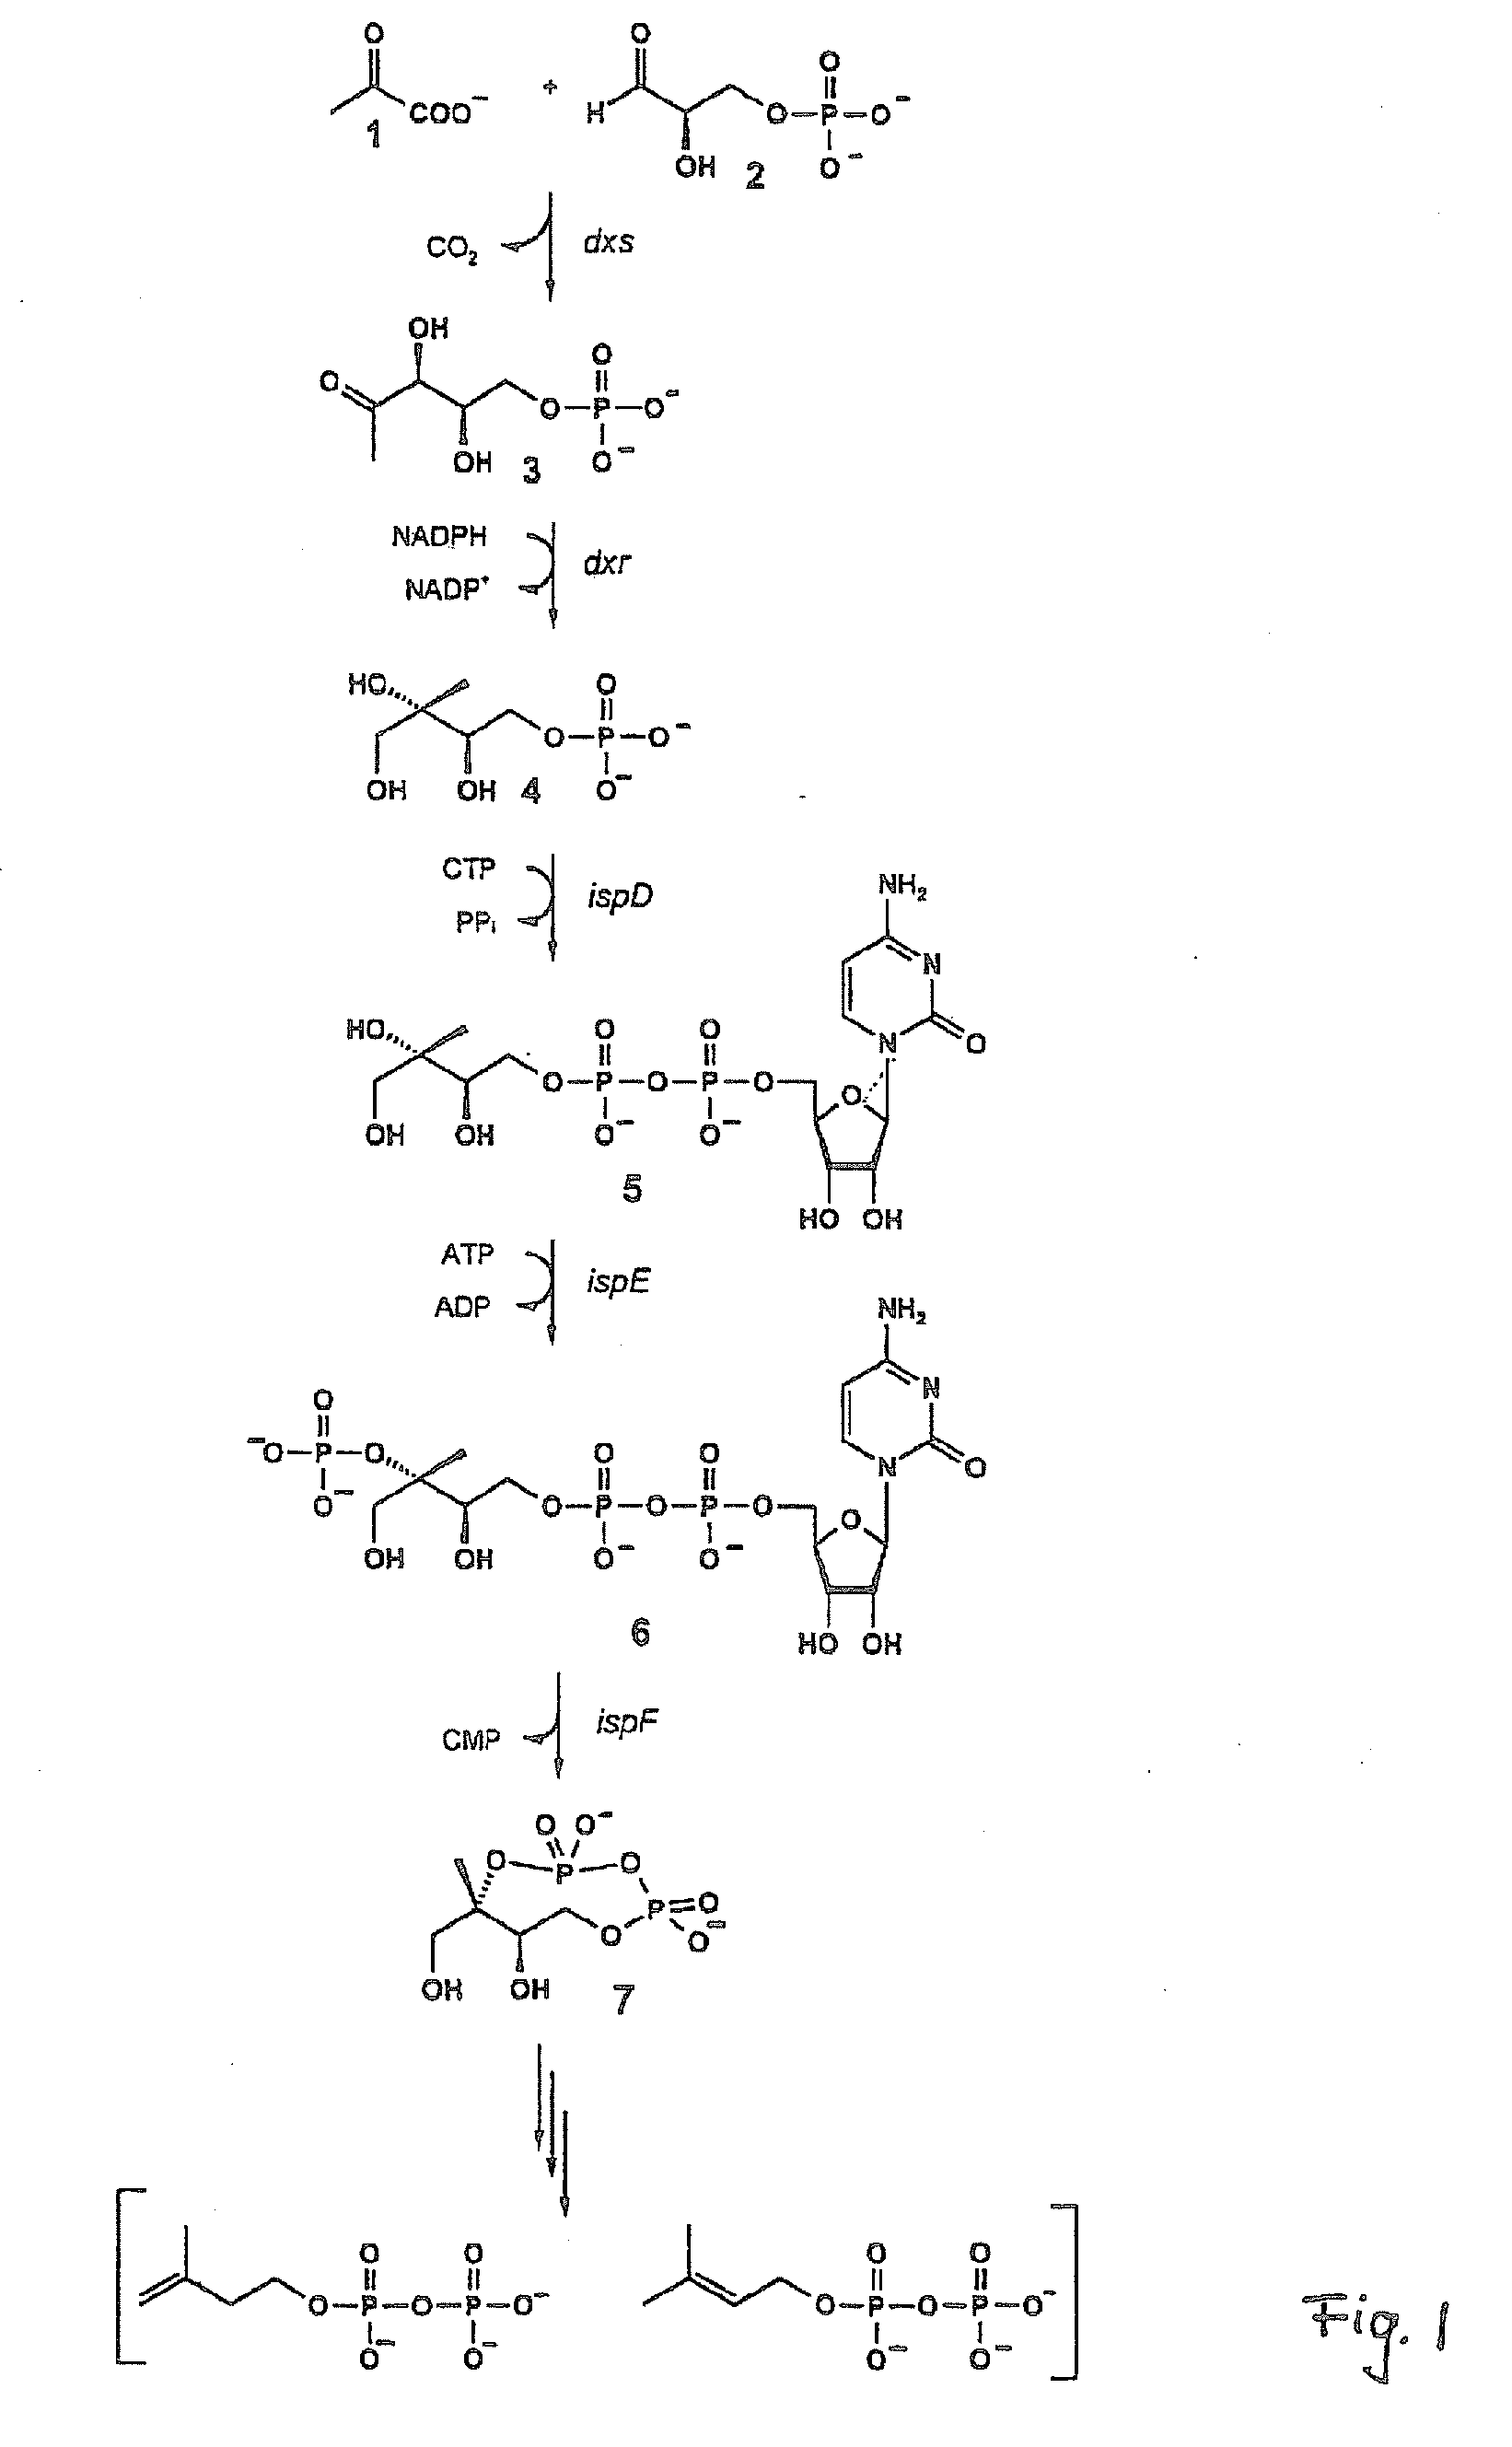 Intermediates and enzymes of the non-mevalonate isoprenoid pathway